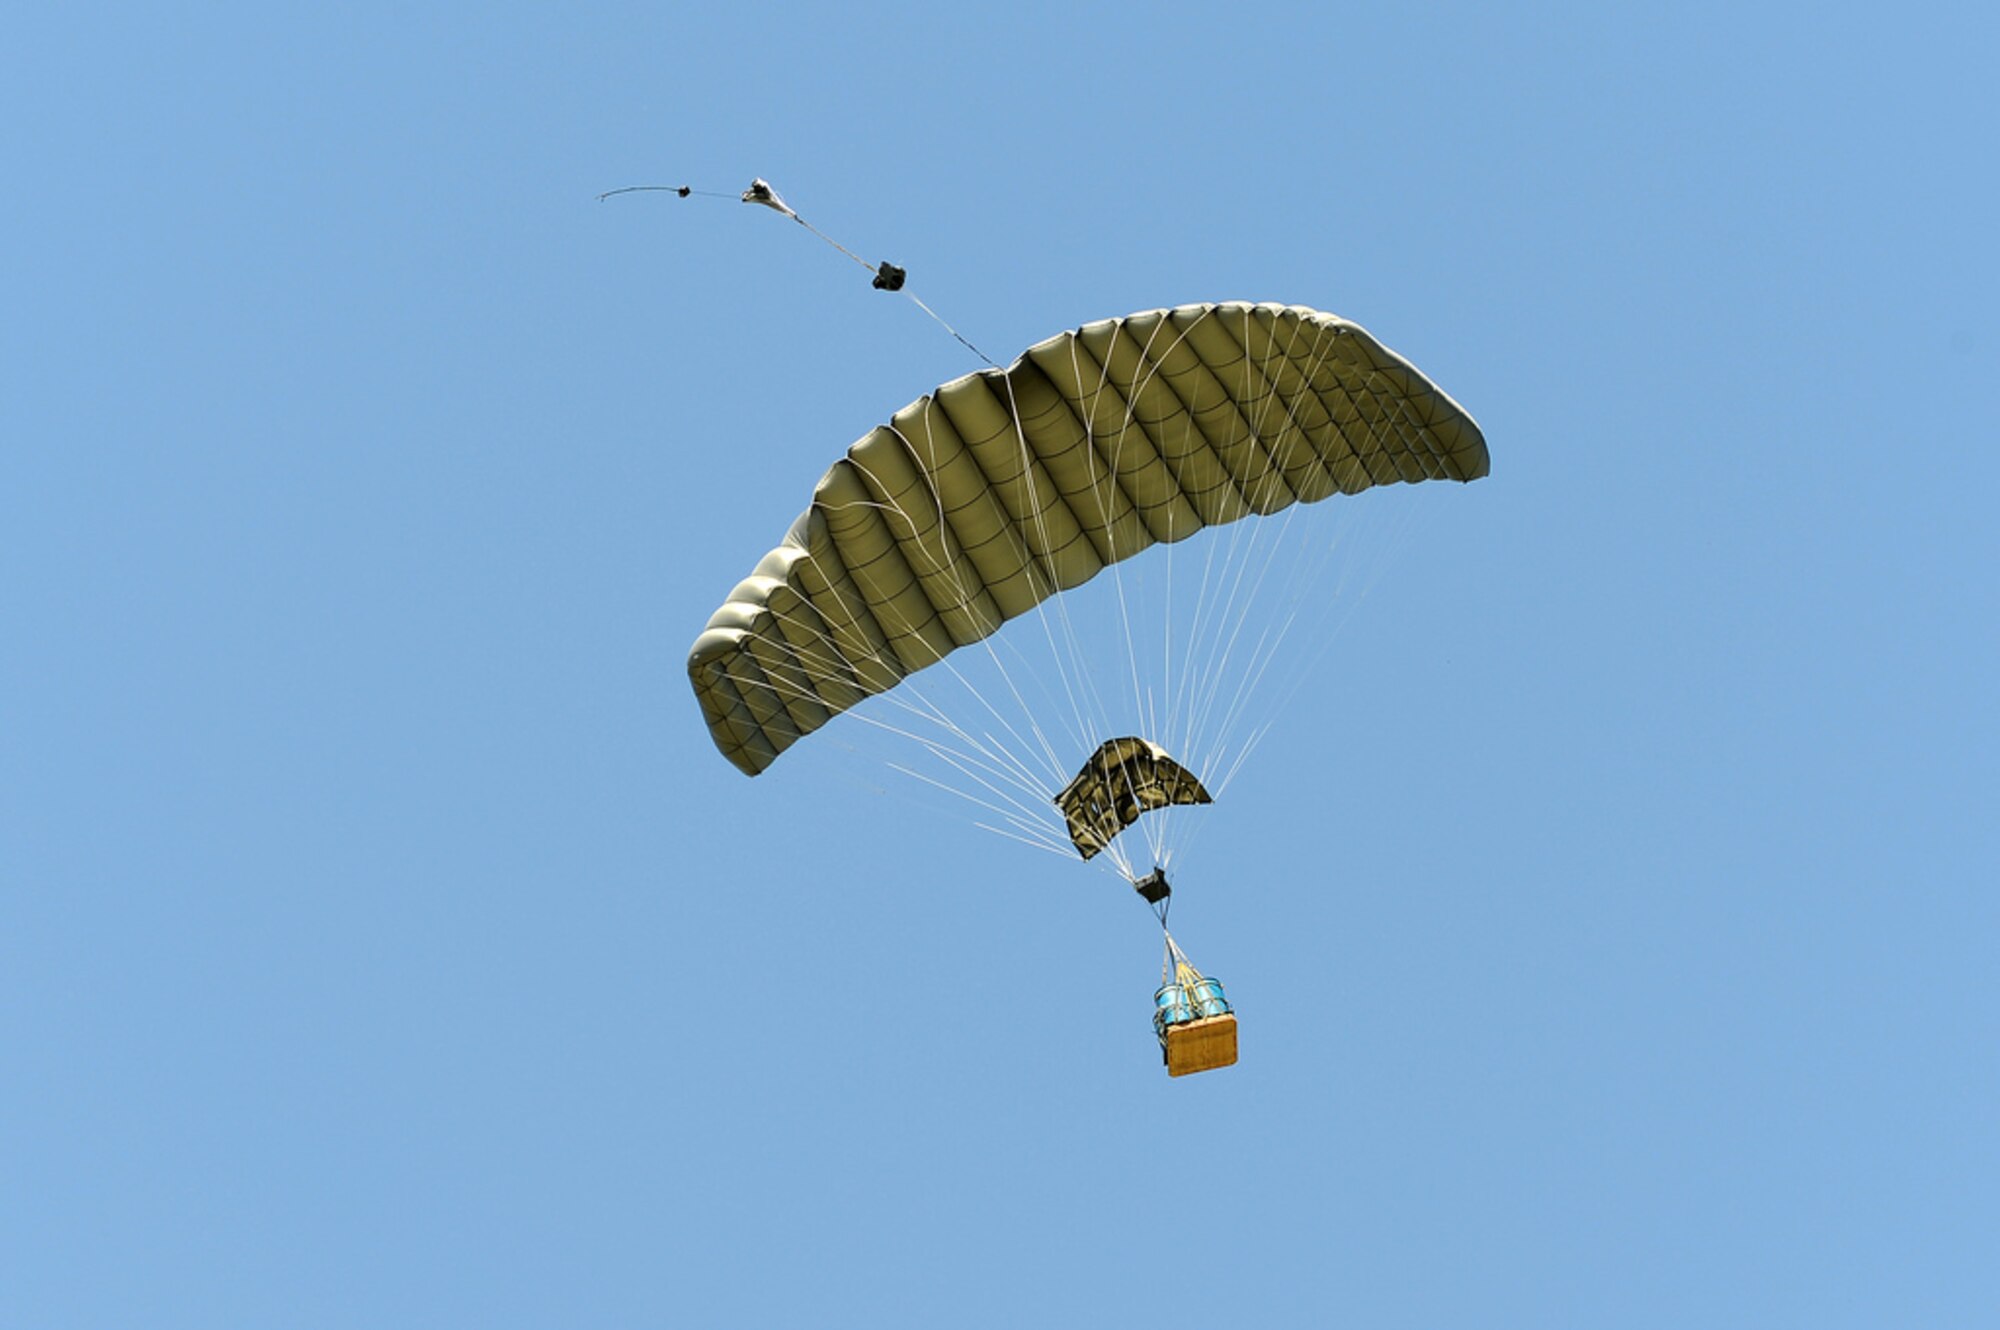 A Joint Precision Airdrop System (JPADS) bundle descends to the ground during a training exercise Tuesday, April 24, at the Antelope Drop Zone at Fort Hood. JPADS is an airdrop system that uses Global Positioning Satellite, steerable parachutes and an onboard computer to steer loads to a designated point of impact on a drop zone. (Photo by Daniel Cernero, III Corps and Fort Hood Public Affairs)